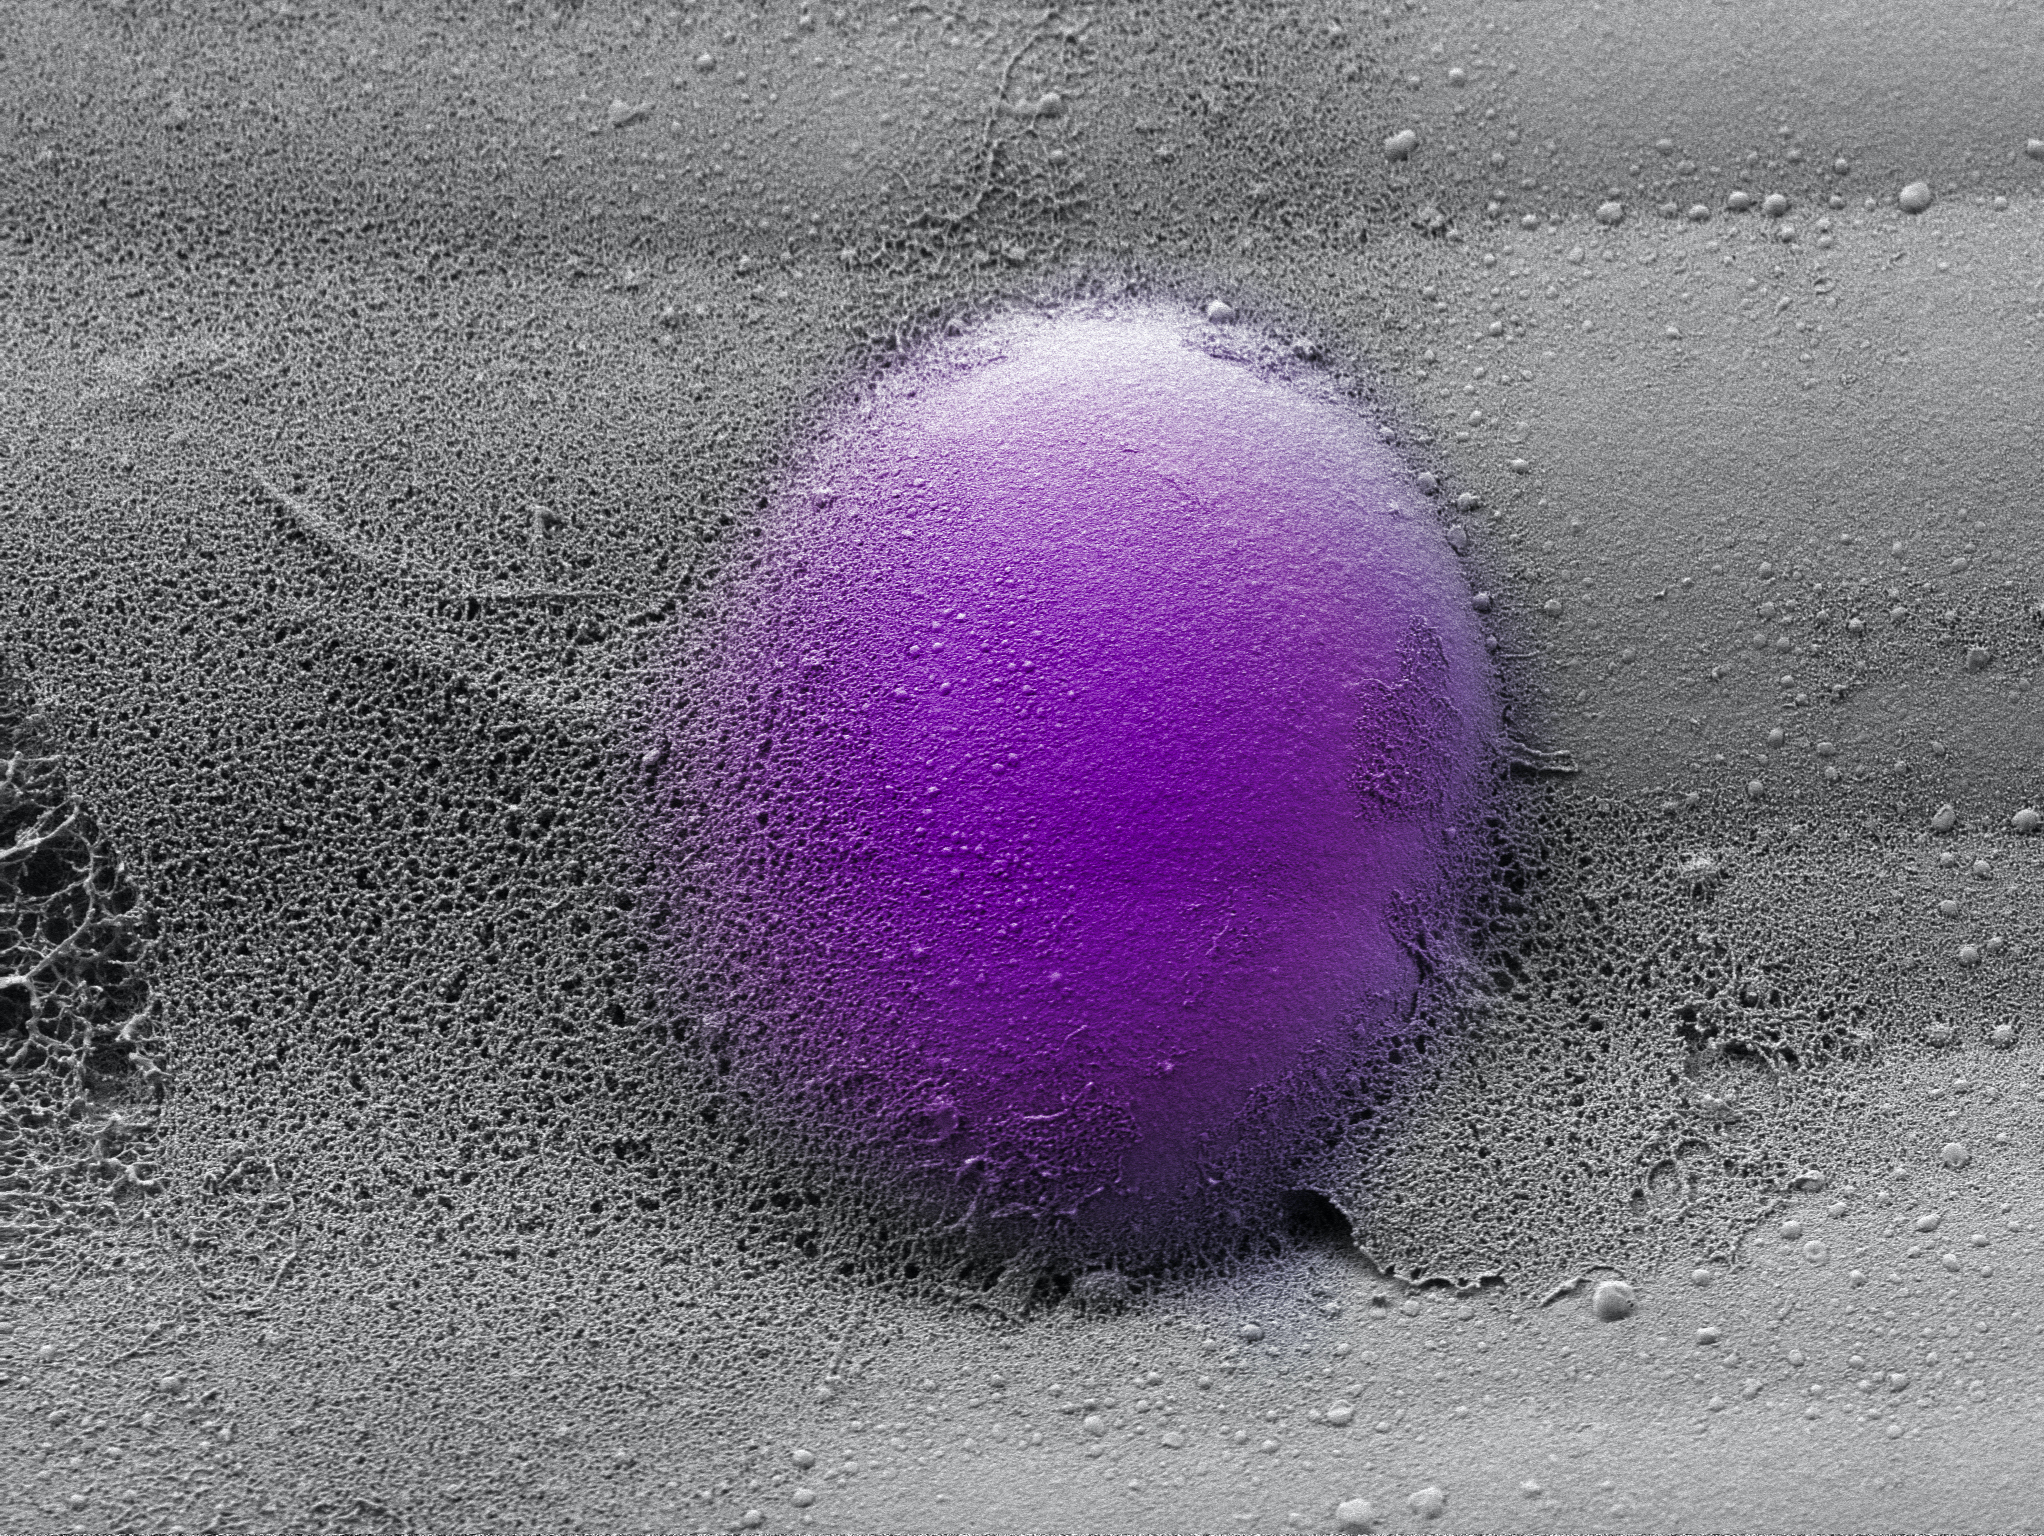 microscopic image of an immune cell labeled purple against a gray background